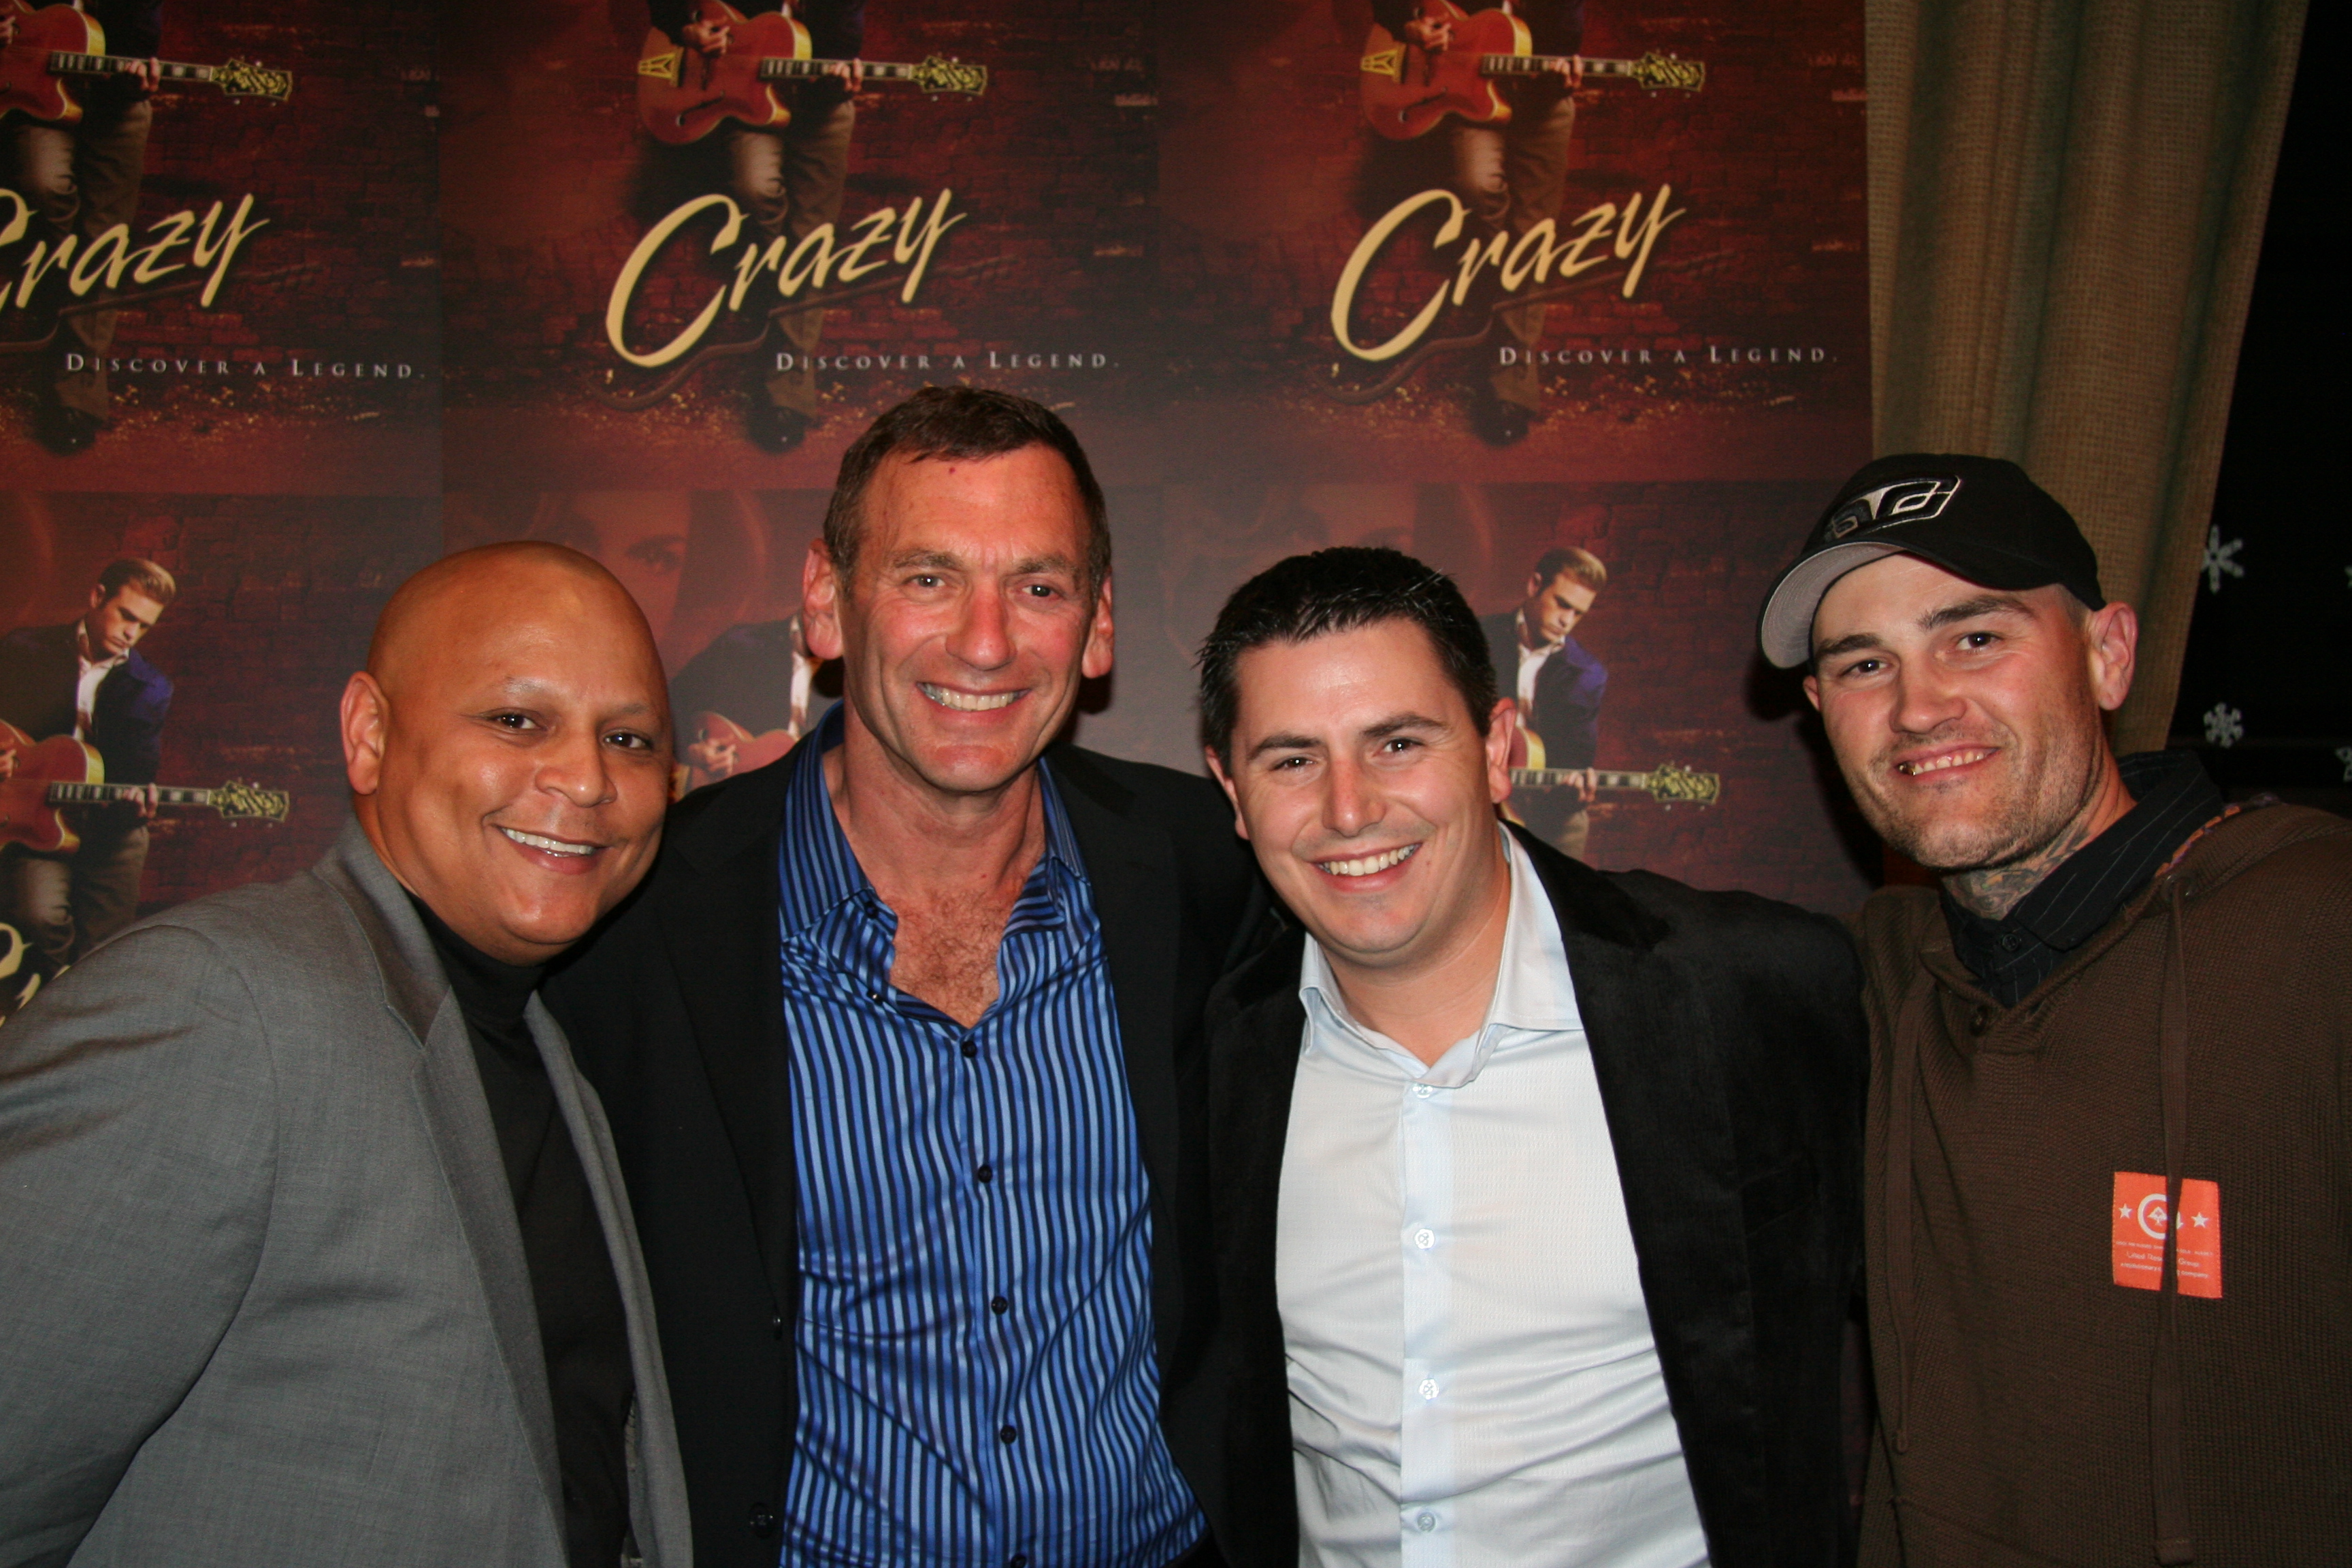 Ty Manns, Rick Bieber, Ryan Johnston, and Mike Metzger at the Screening of Crazy in Hollywood.